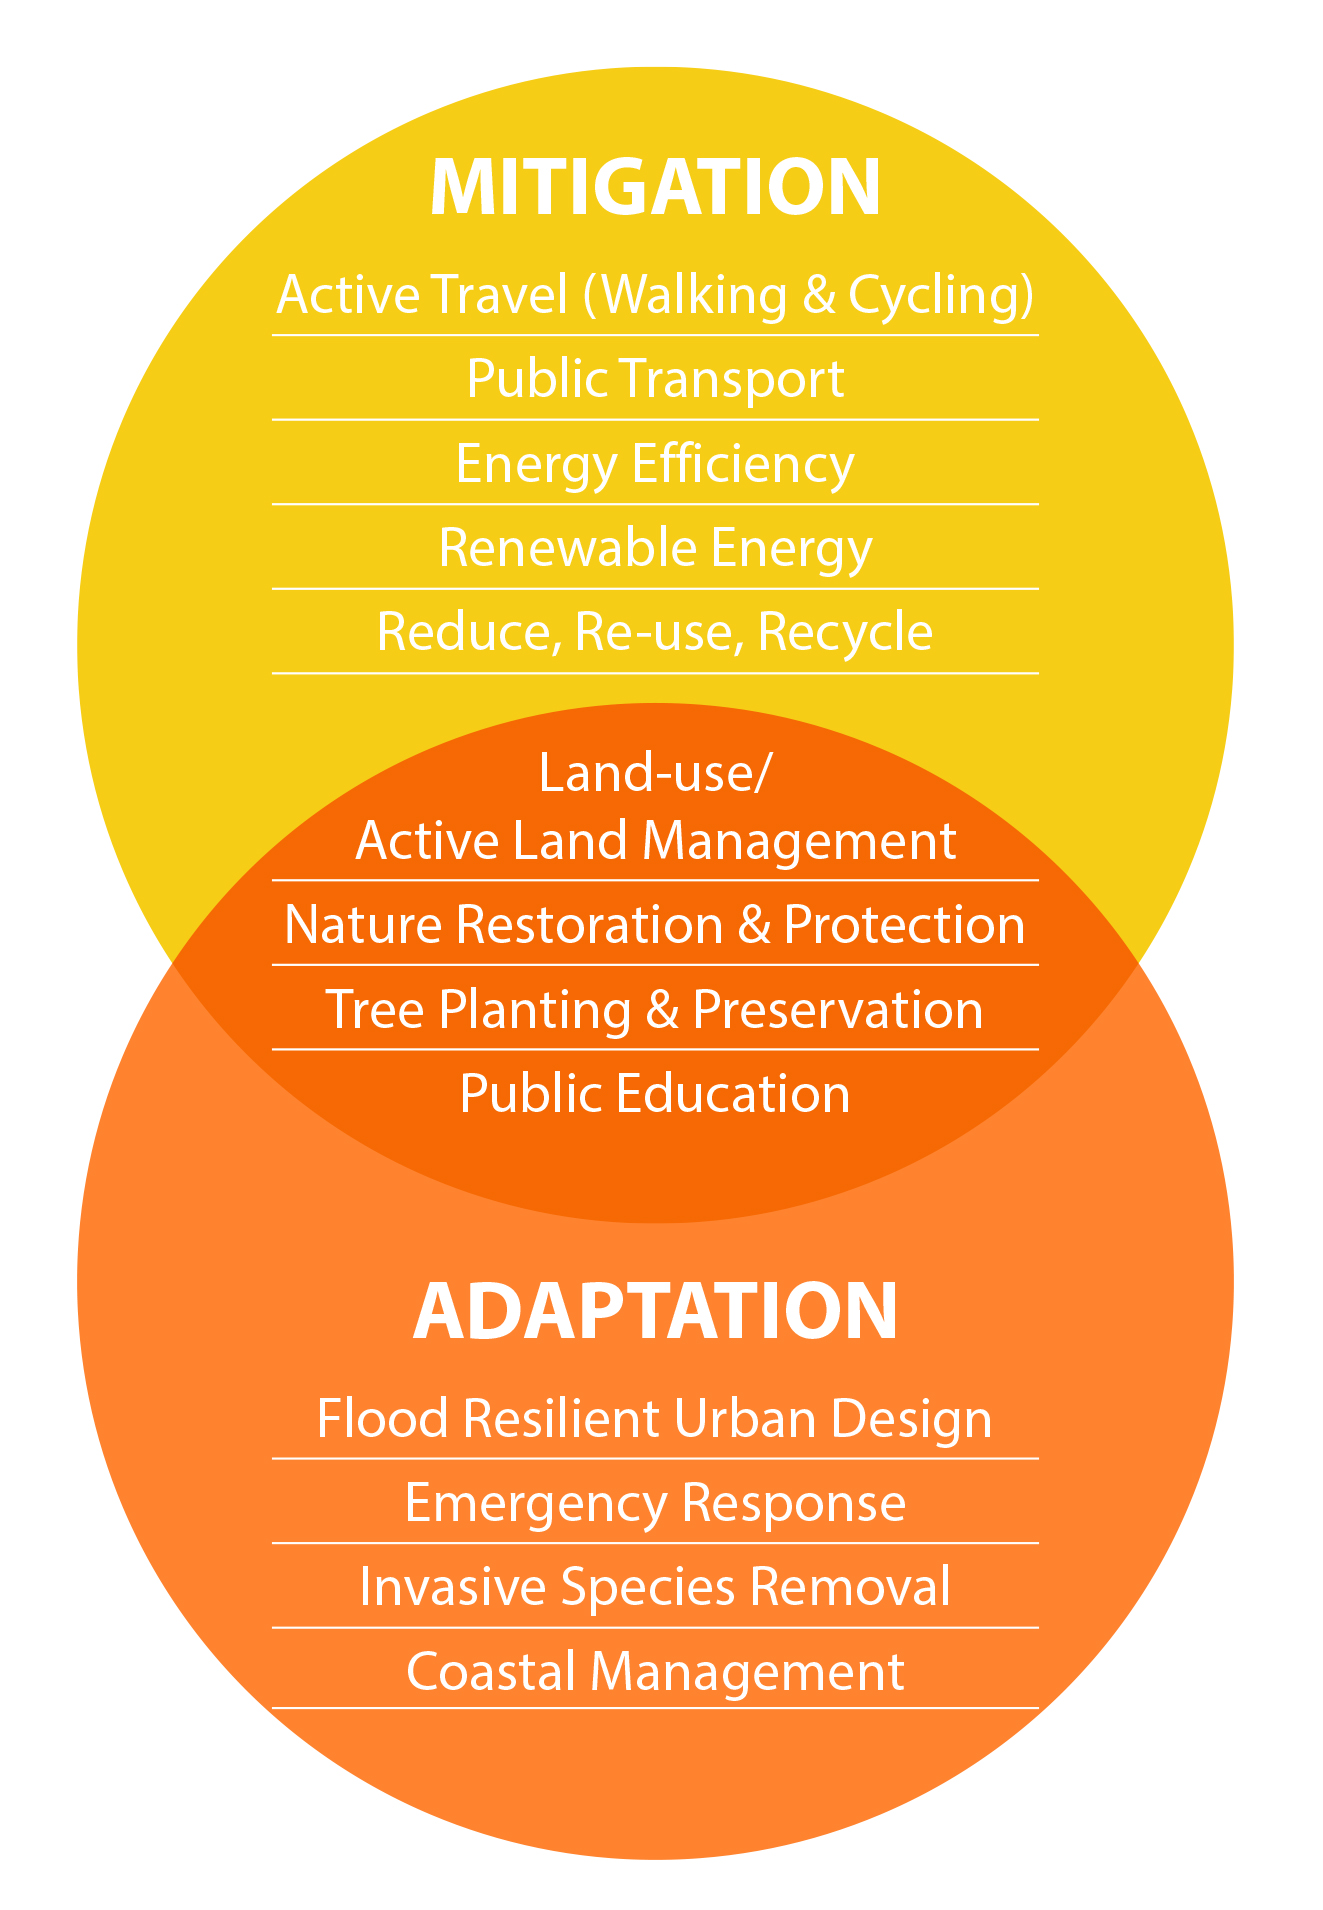 Figure 11.6: A diagram showing the Climate Mitigation and Climate Adaptation and their interrelationship